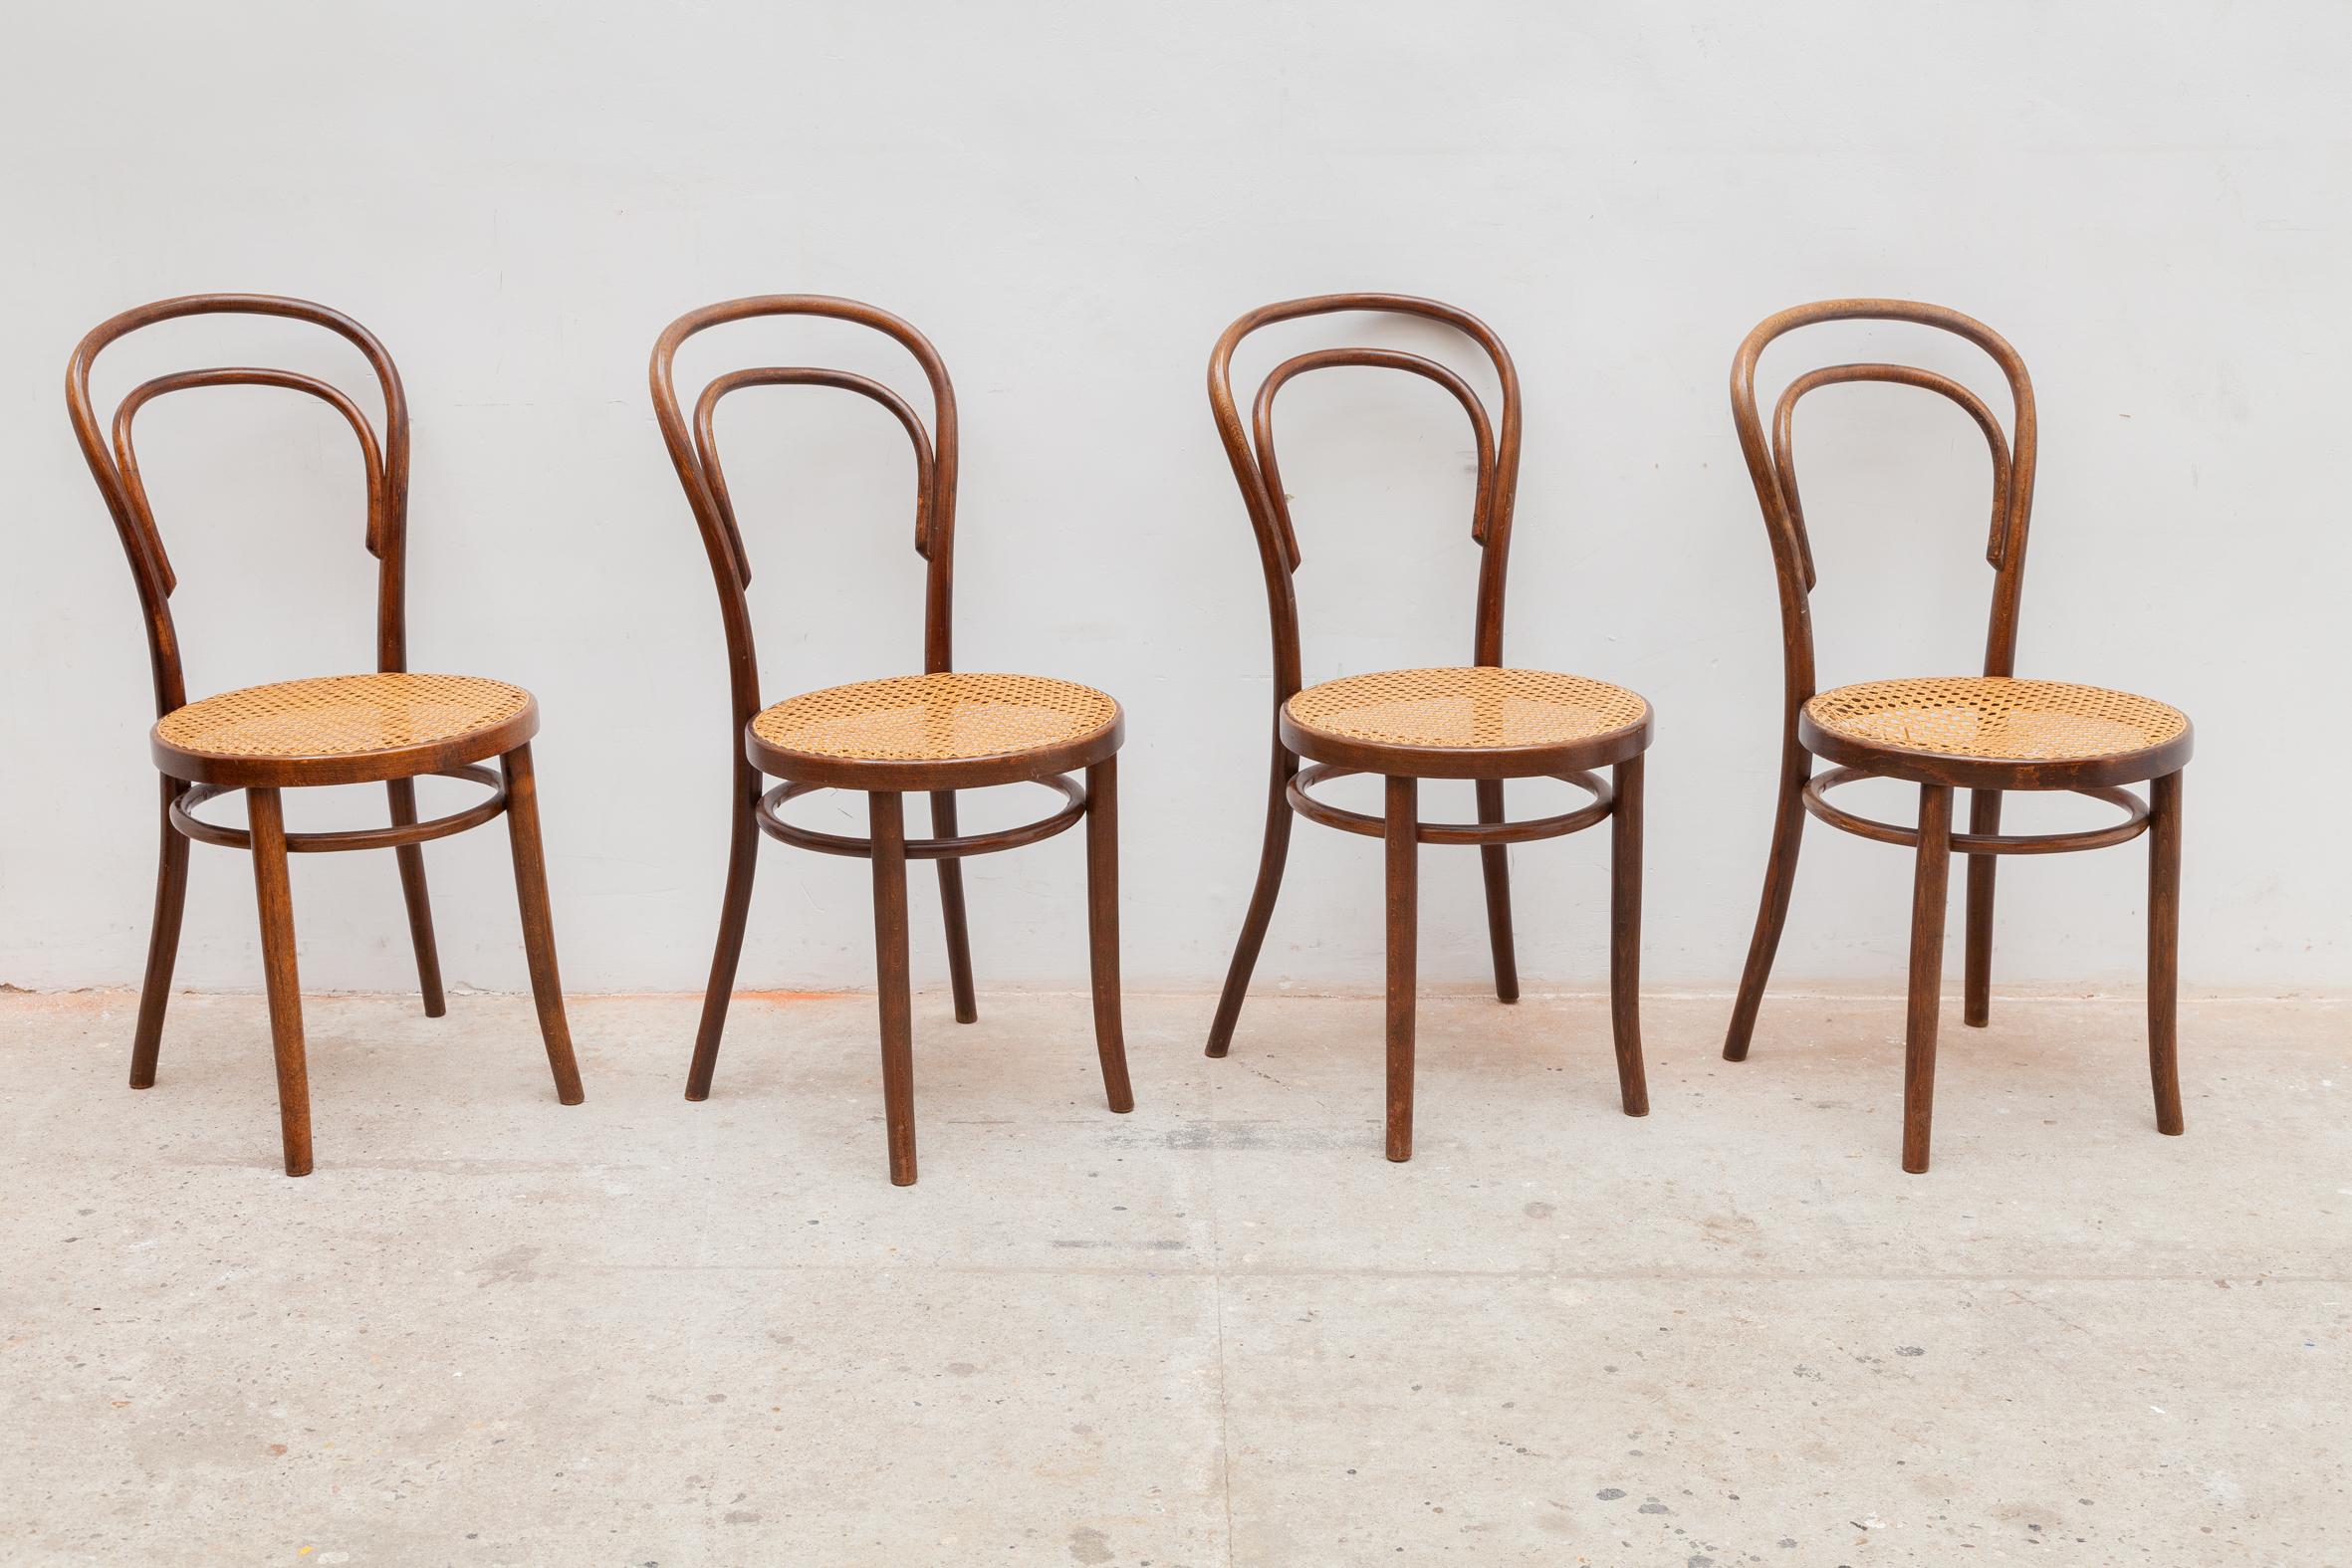 Austrian Thonet Set of Four No.14 Chairs and Two Stools, 1930s, Austria